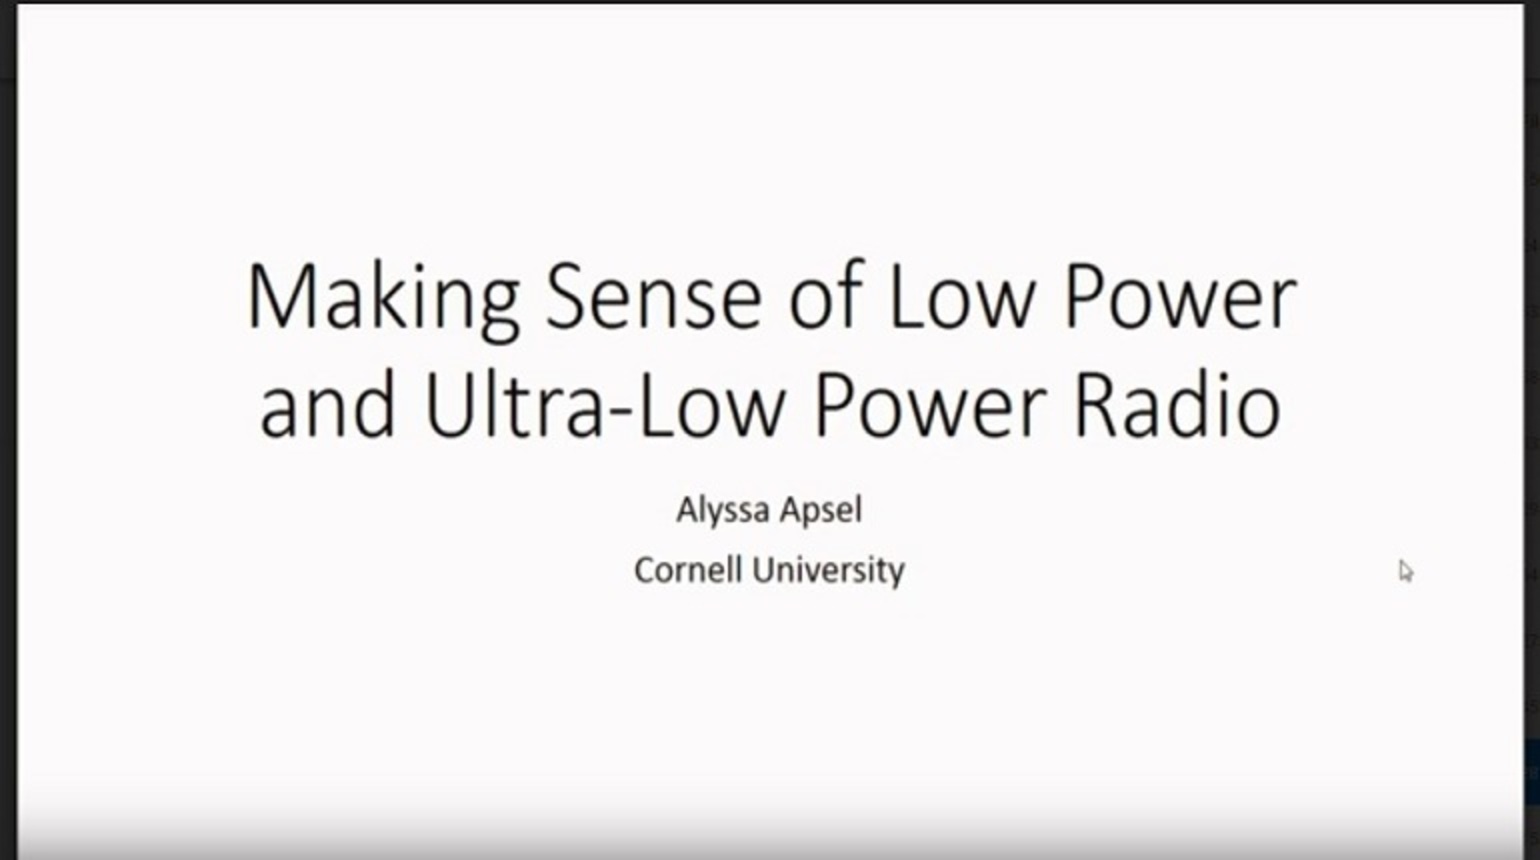 Making Sense of Low Power and Ultra-Low Power Radio